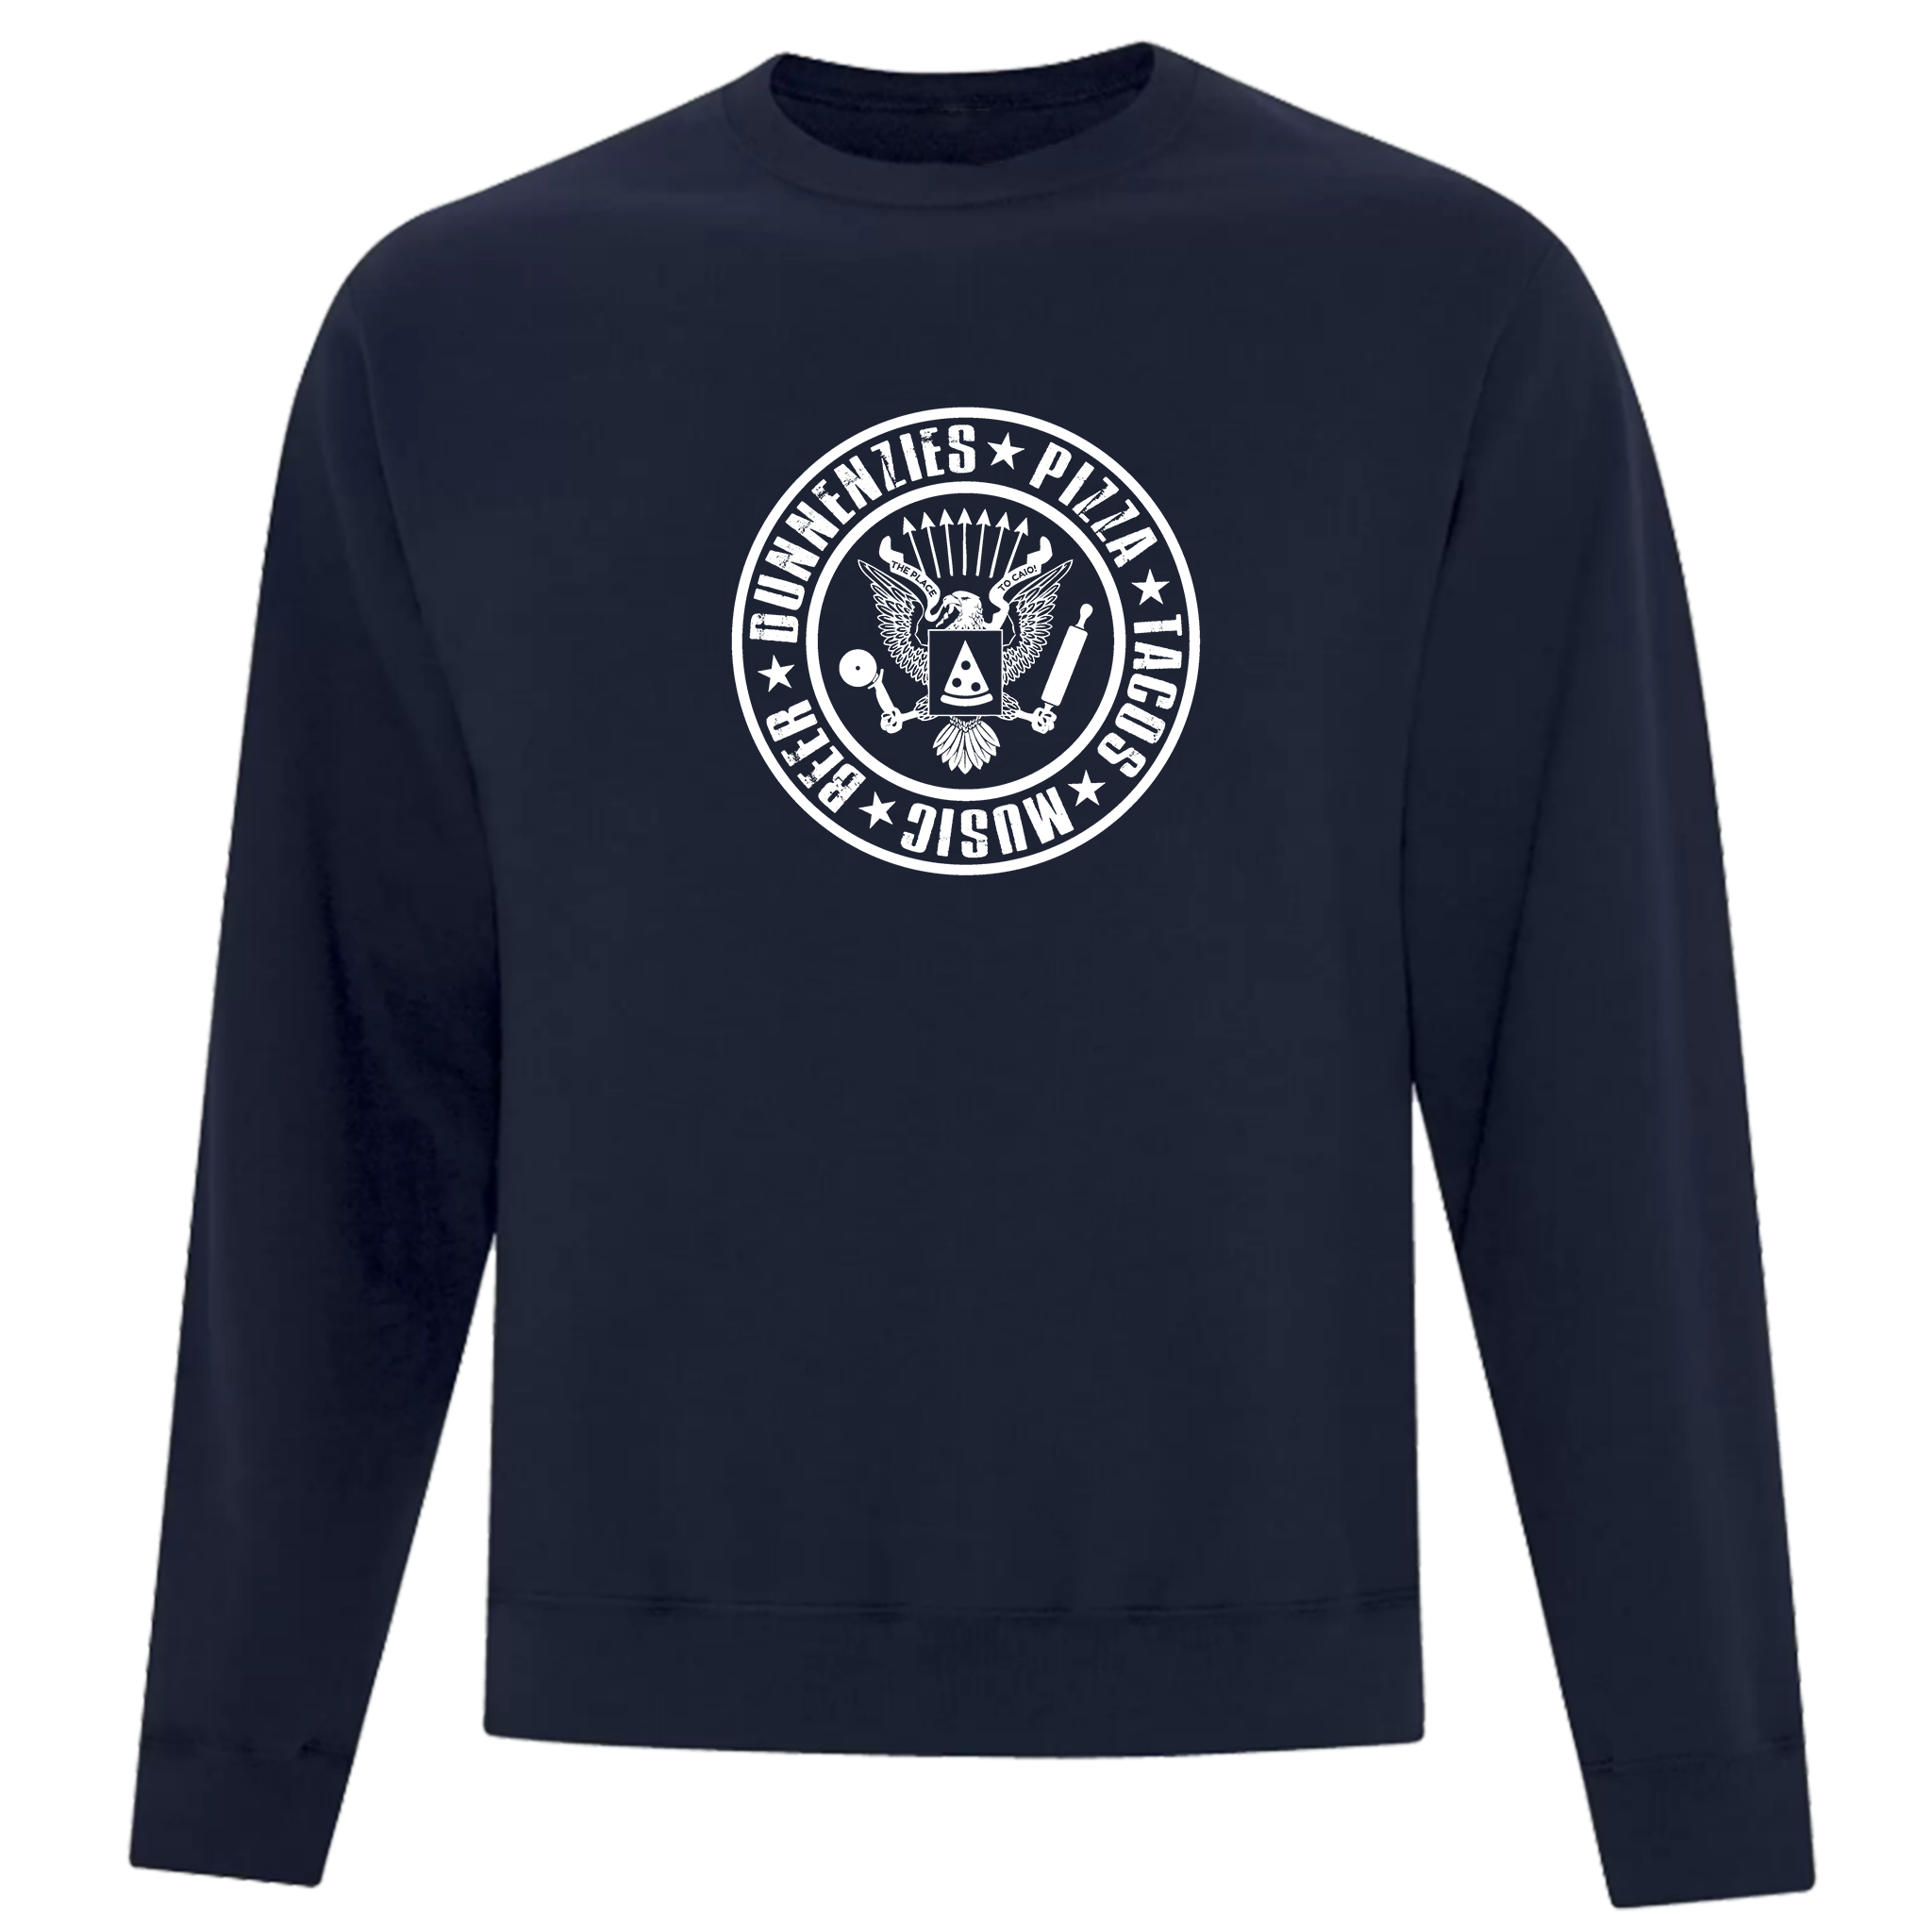 Dunnenzies Reflections Apparel Crewneck Sweater - Unisex Sizing XS-4XL - Navy